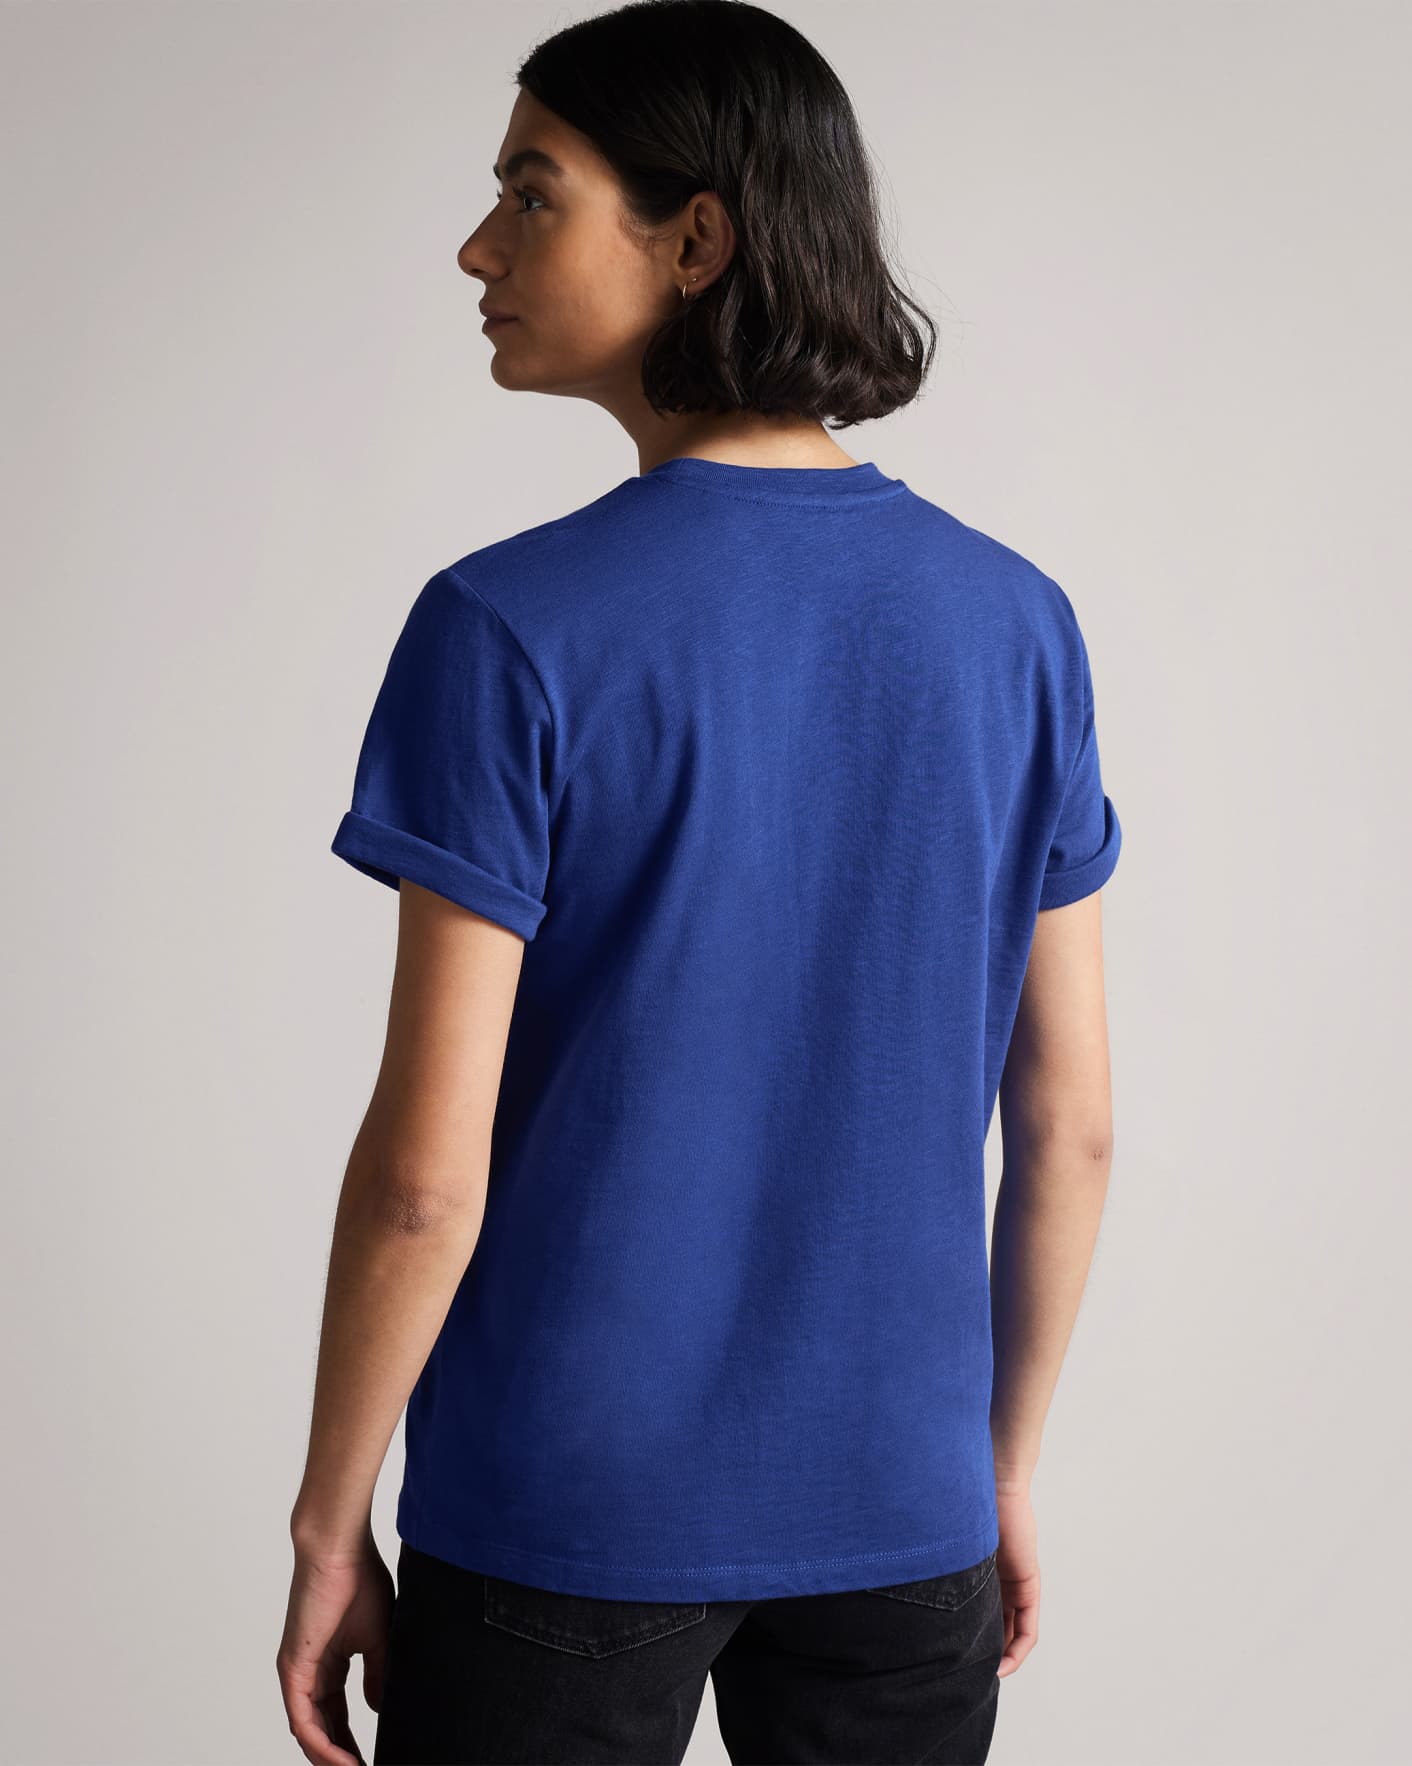 Medium Blue Give Us A Chip Graphic T-Shirt Ted Baker